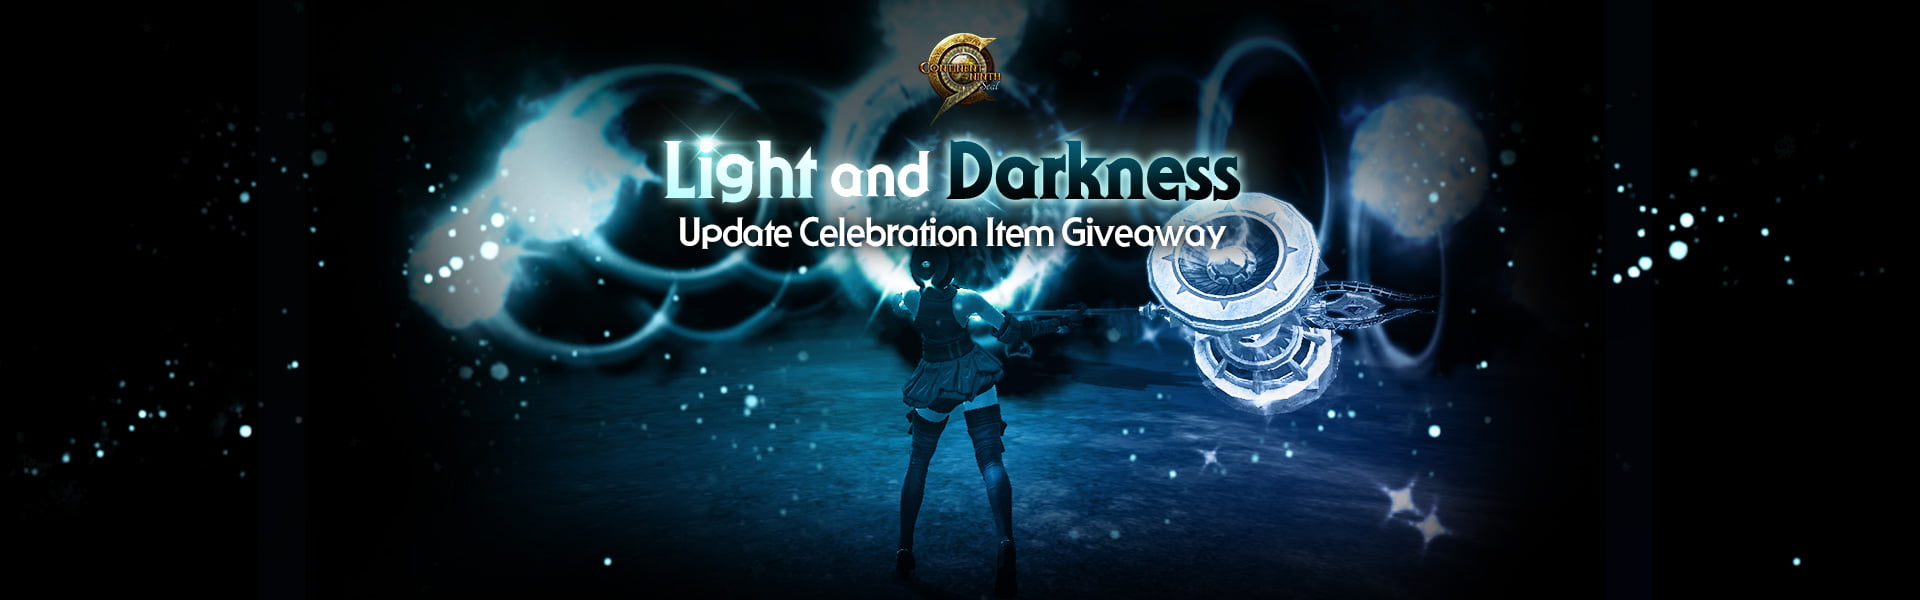 C9 Light and Darkness Update Celebration Gift Giveaway 12